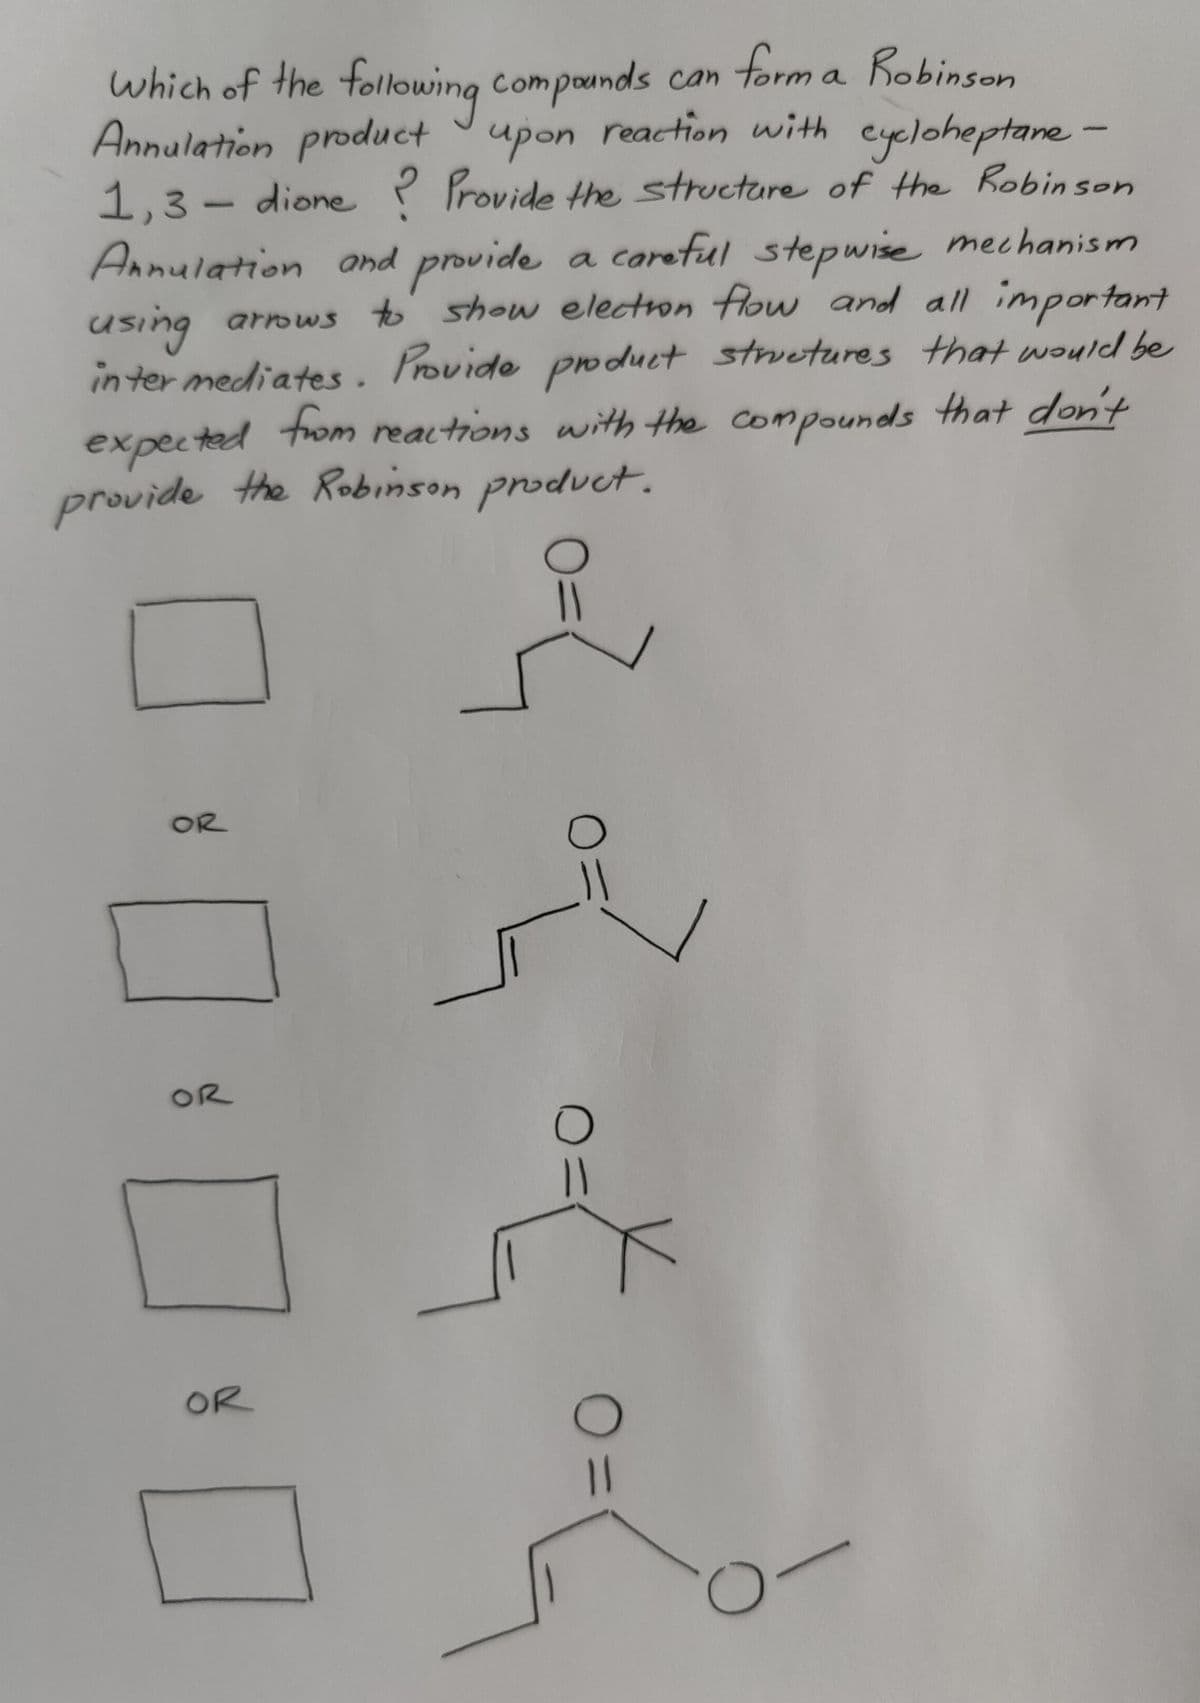 which of the following compounds can form a Robinson
Annulation product upon reaction with cycloheptane -
1,3-dione ? Provide the structure of the Robinson
Annulation and provide a careful stepwise mechanism
using
arrows to show election flow and all important
intermediates. Provide product structures that would be
expected from reactions with the compounds that don't
provide the Robinson product.
OR
OR
OR